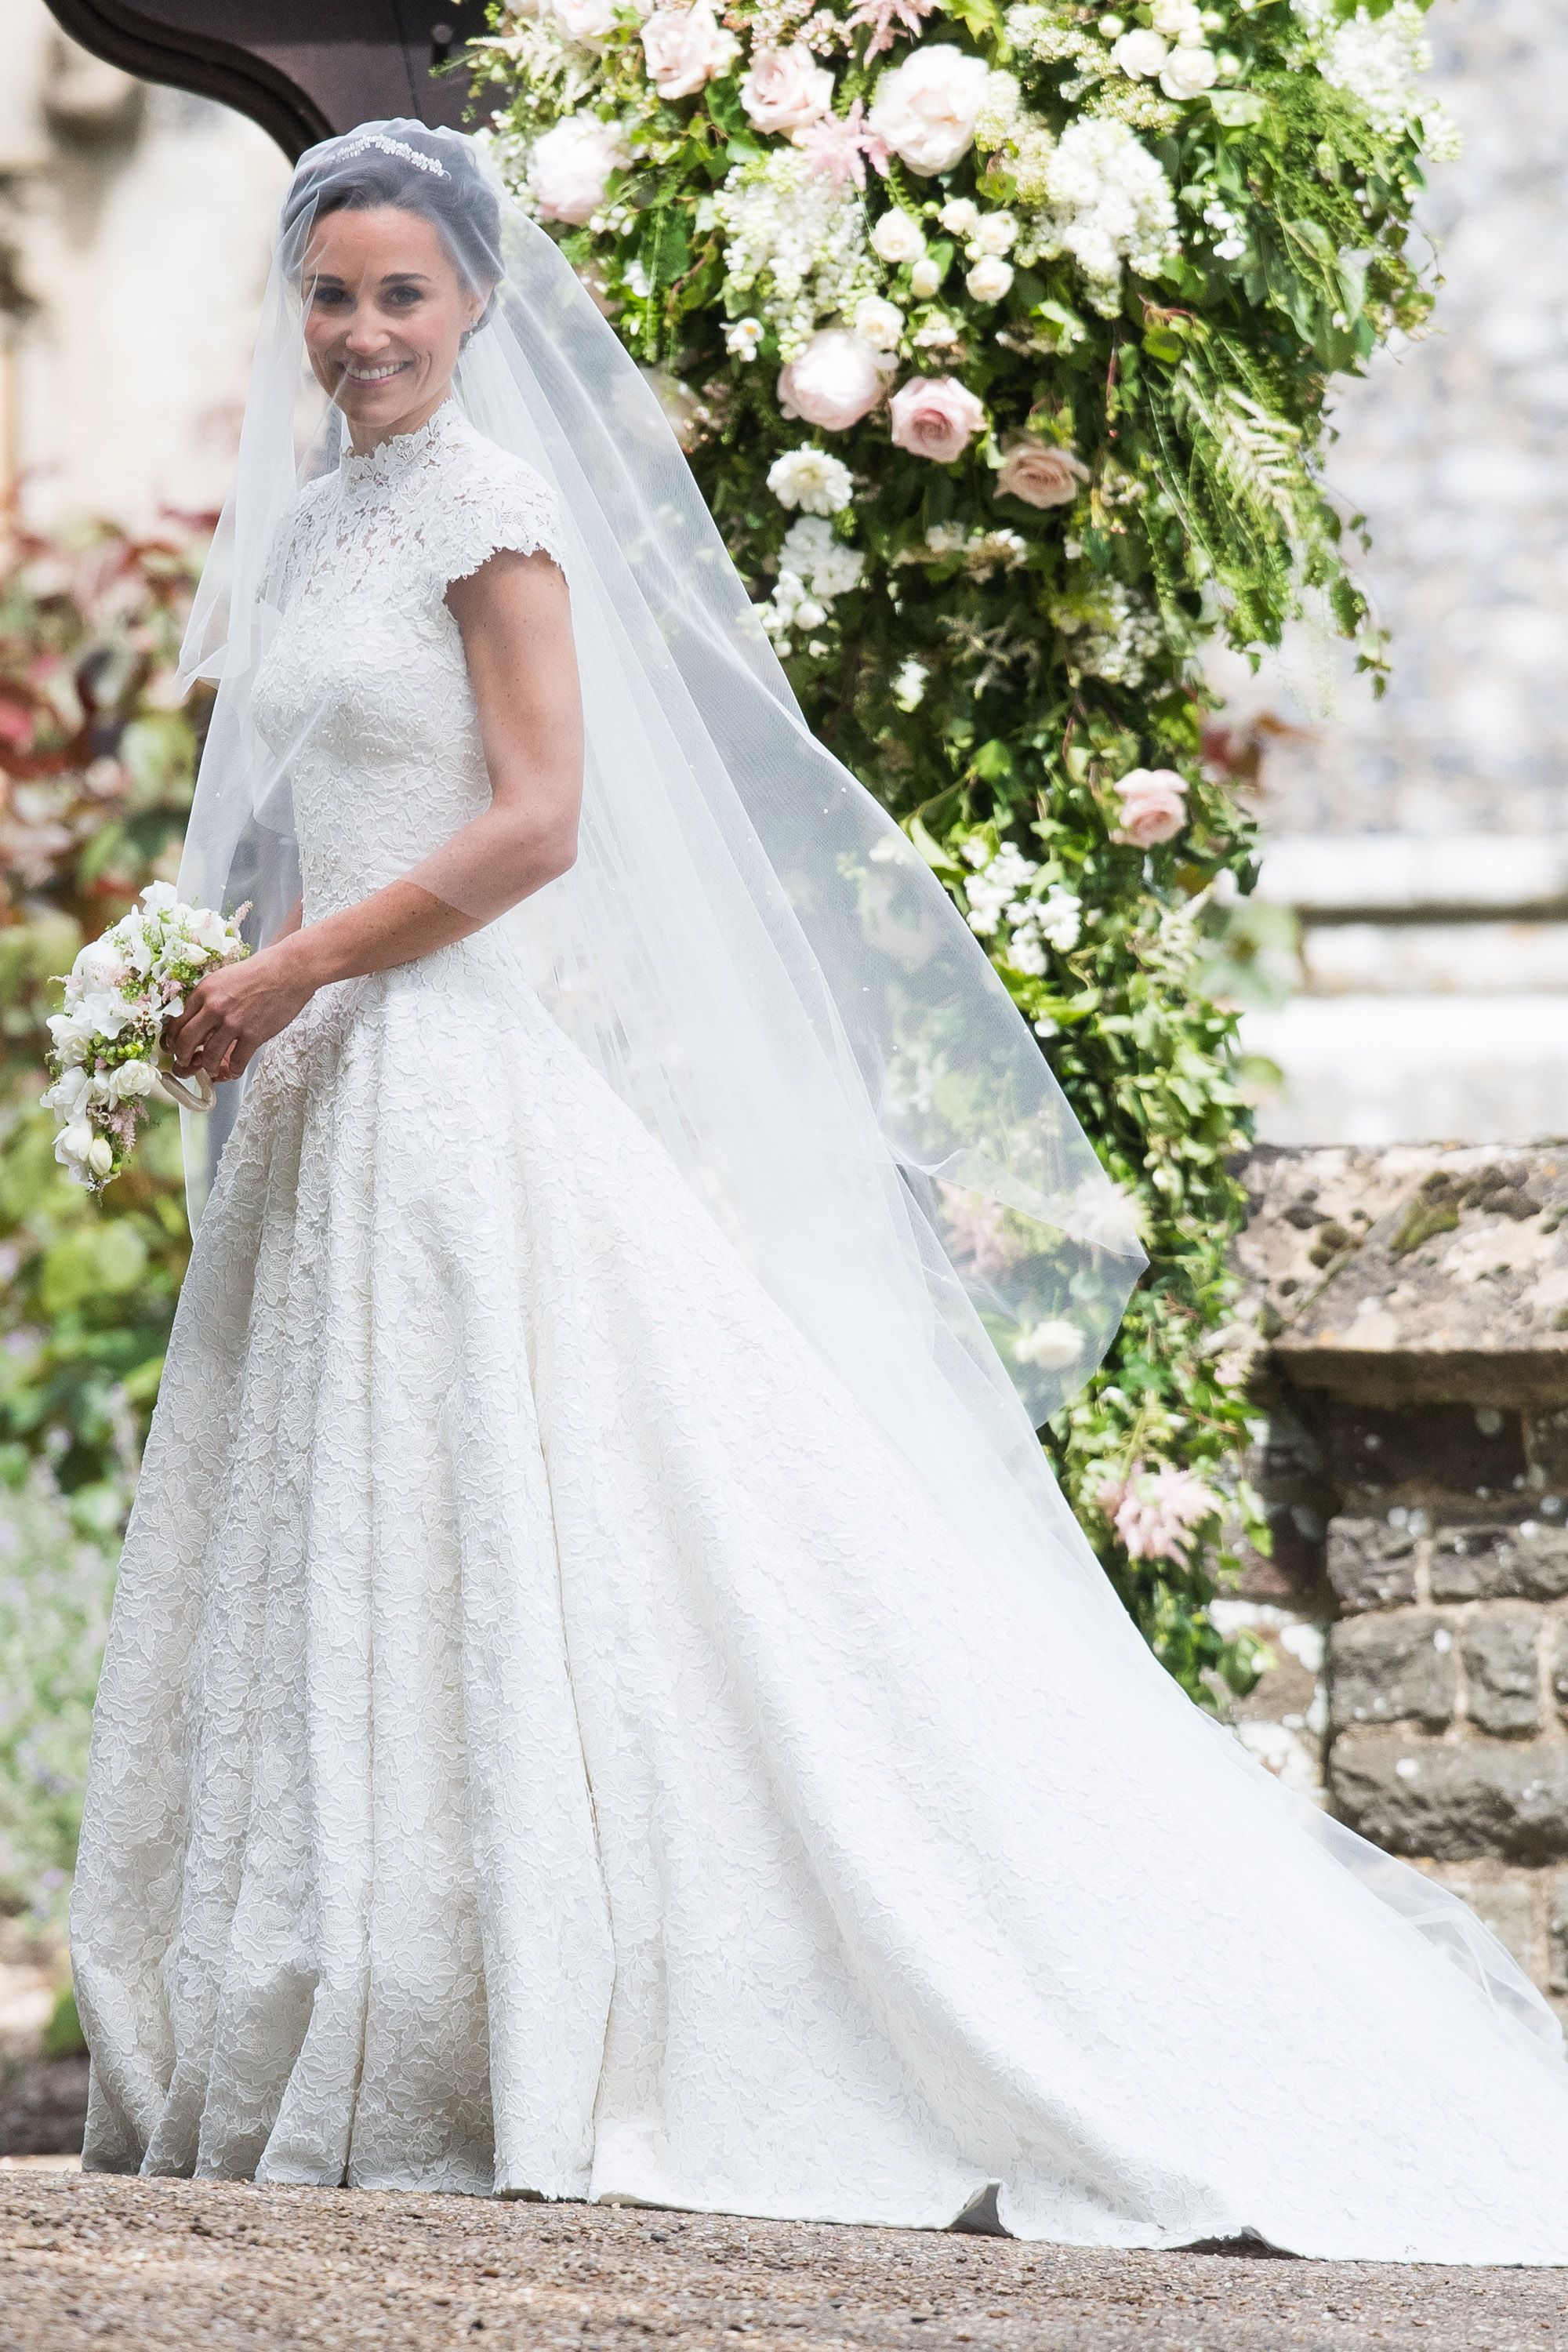 Buy > most iconic wedding dresses > in stock